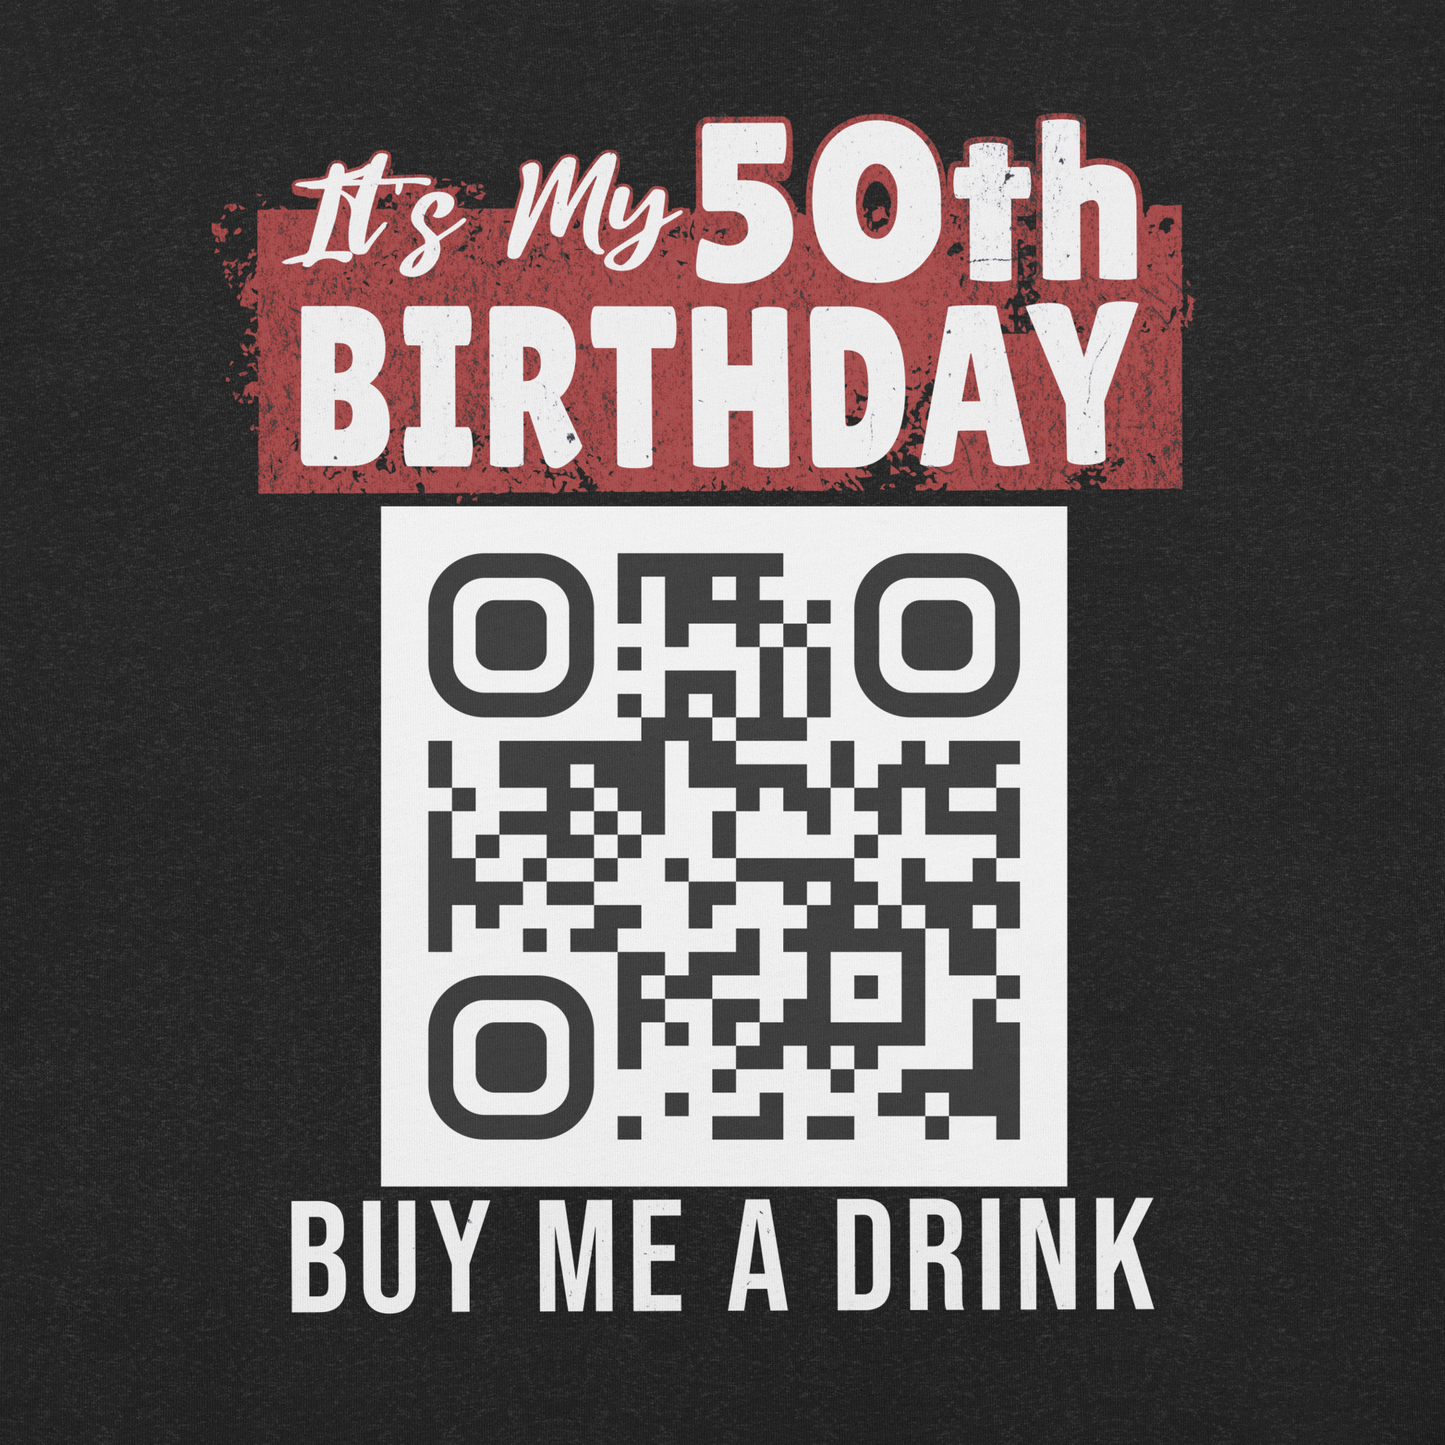 It's My 50th Birthday Buy Me A Drink T-shirt - Personalizable